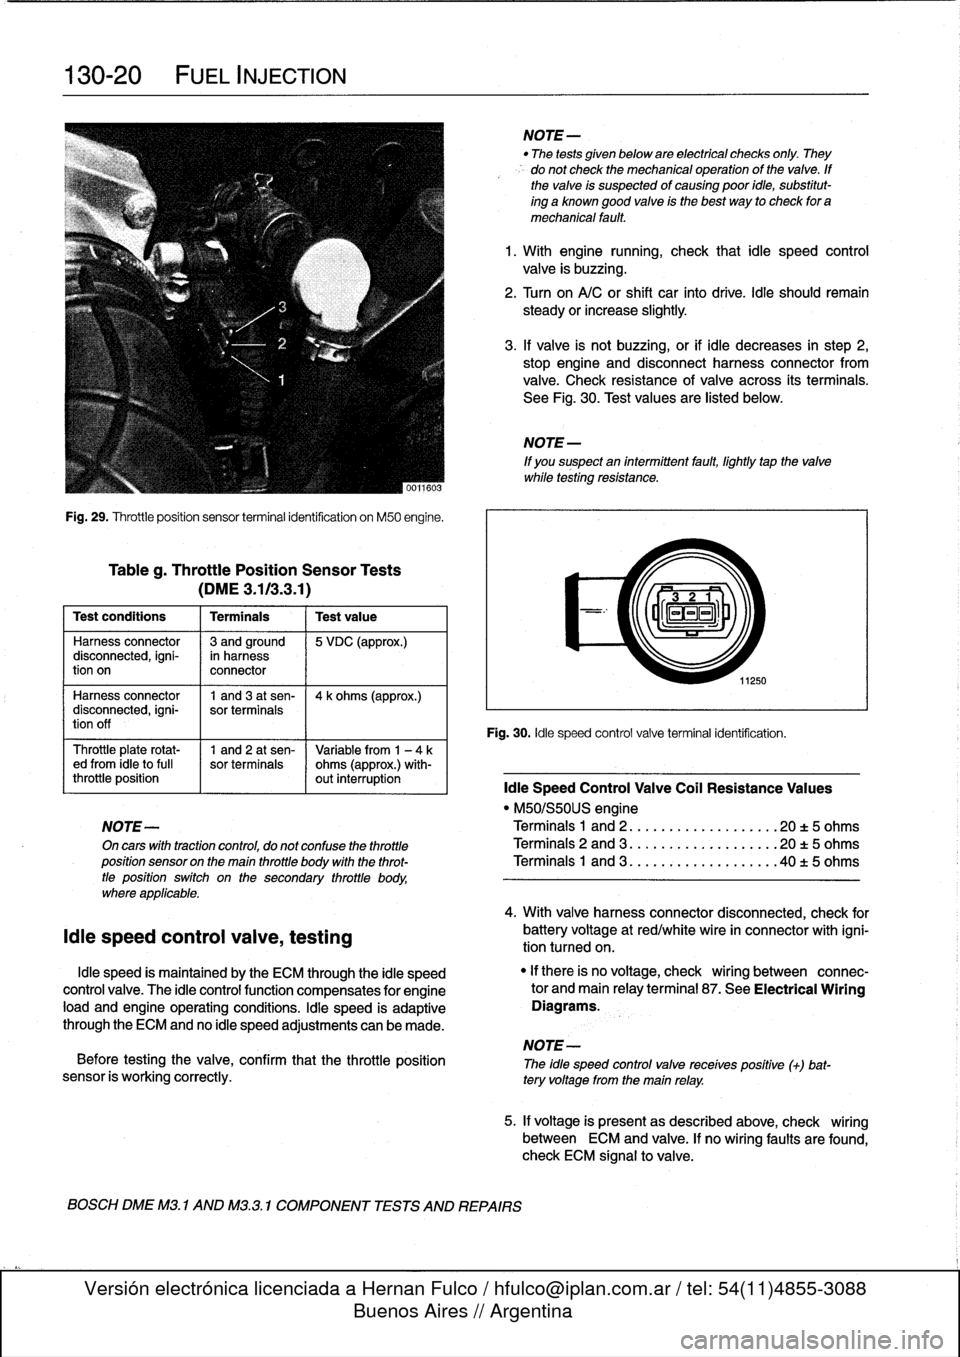 BMW 318i 1992 E36 Workshop Manual 
130-20

	

FUEL
INJECTION

Fig
.
29
.
Throttleposition
sensor
terminal
identification
on
M50
engine
.

Tableg
.
Throttle
Position
Sensor
Tests

(DME3
.113
.3
.1)

Test
conditions

	

I
Terminals

	

